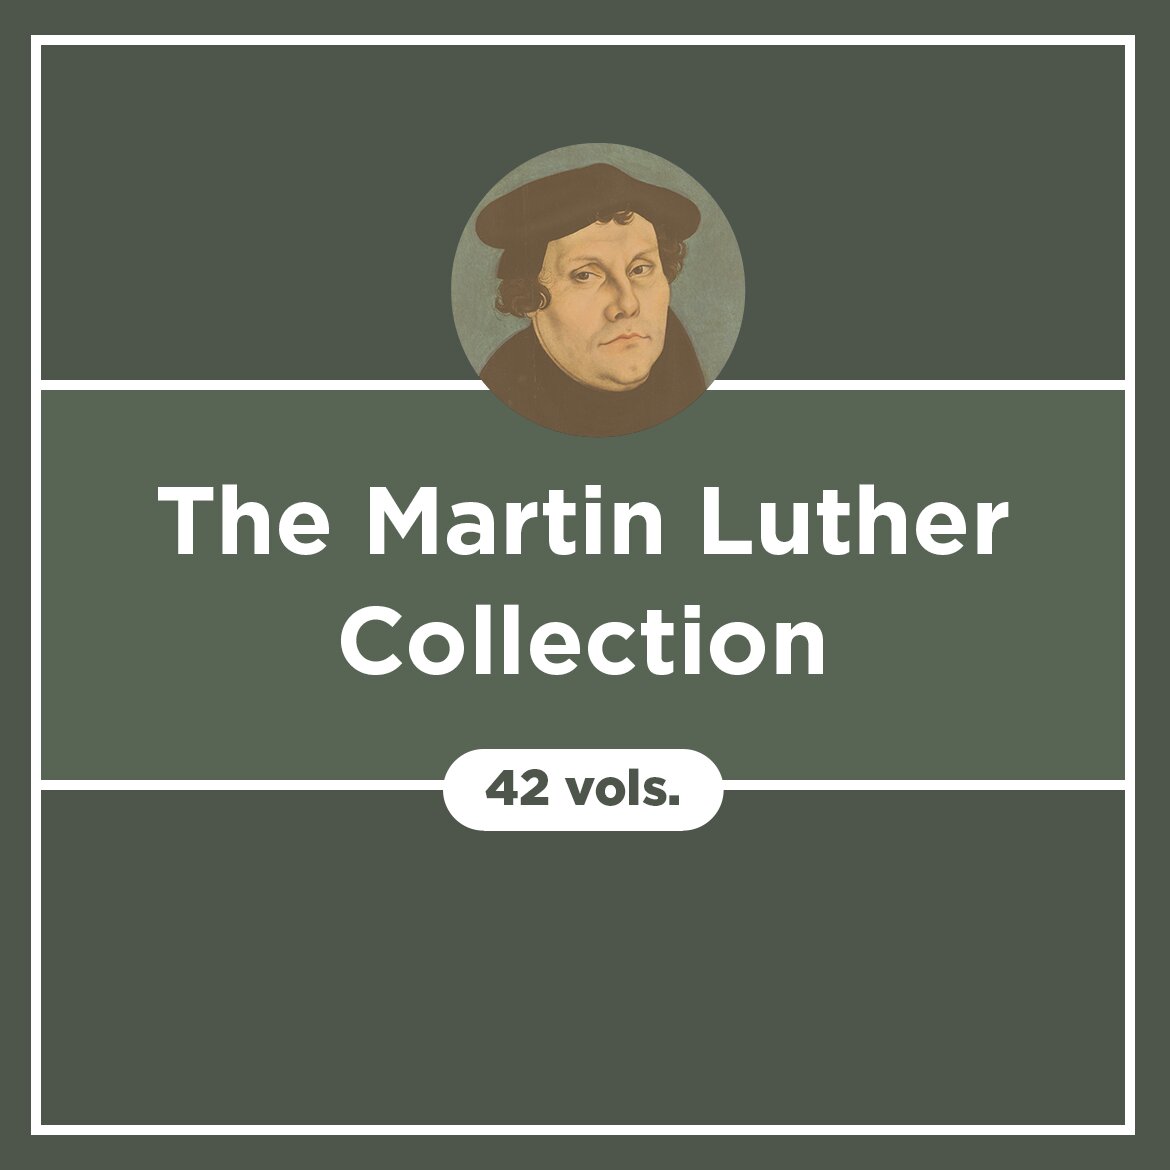 The Martin Luther Collection (42 vols.)